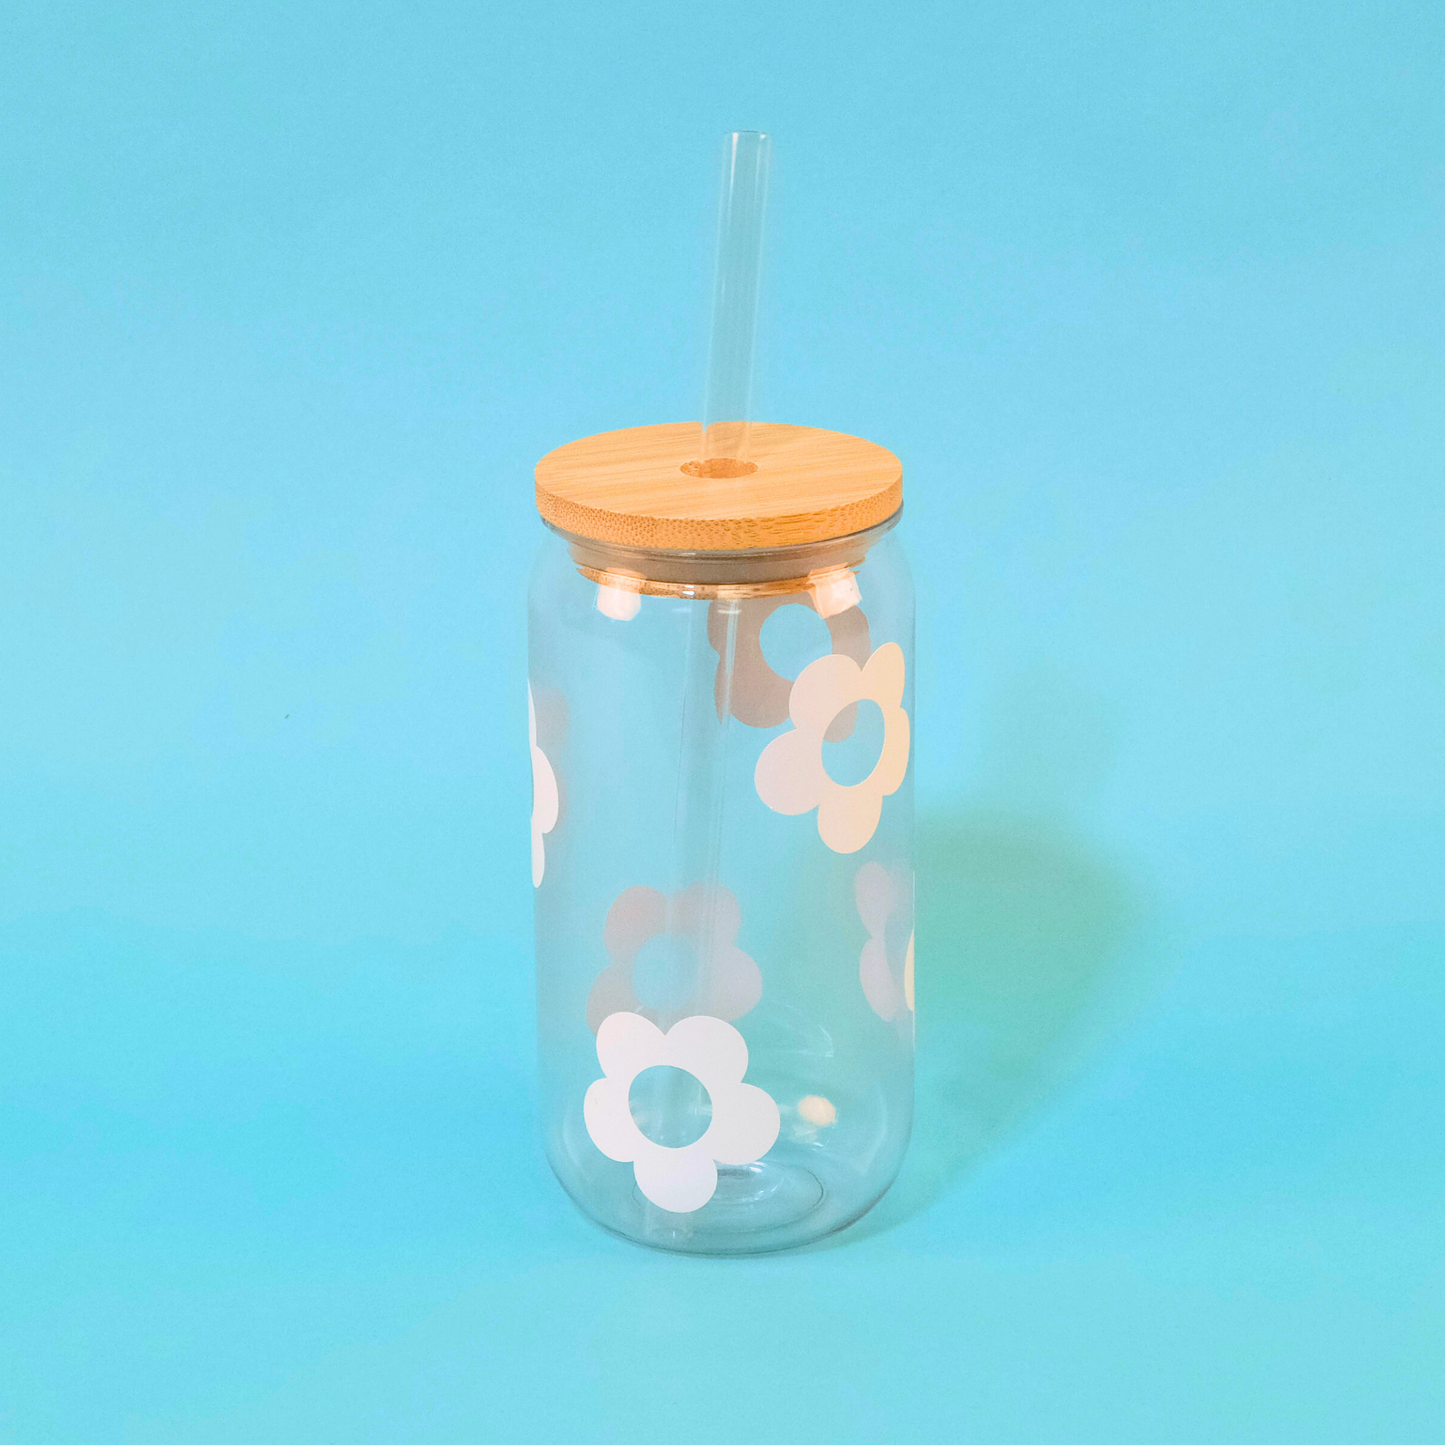 Tumbler with Daisy Flower Pattern Design